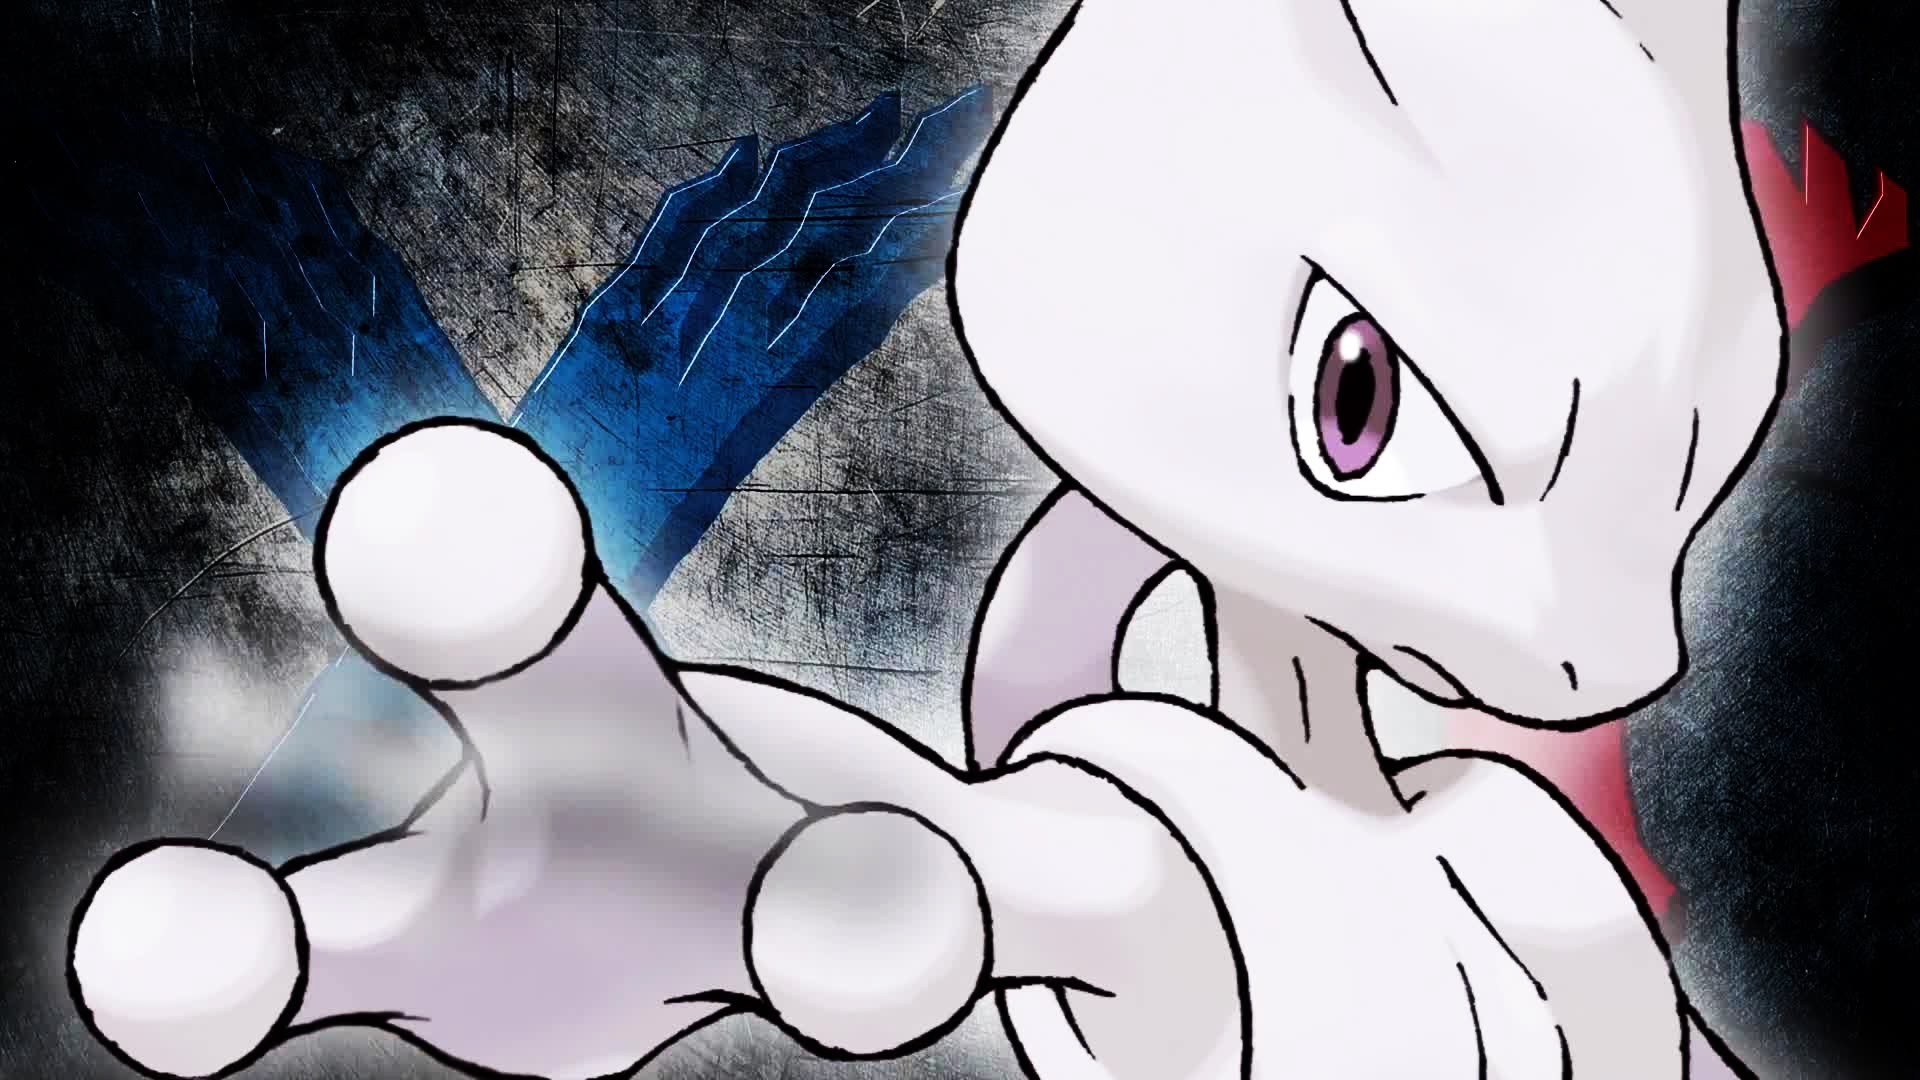 1920x1080 Displaying 20 Images For Mega Lucario Vs Mewtwo Wallpaper Picture...